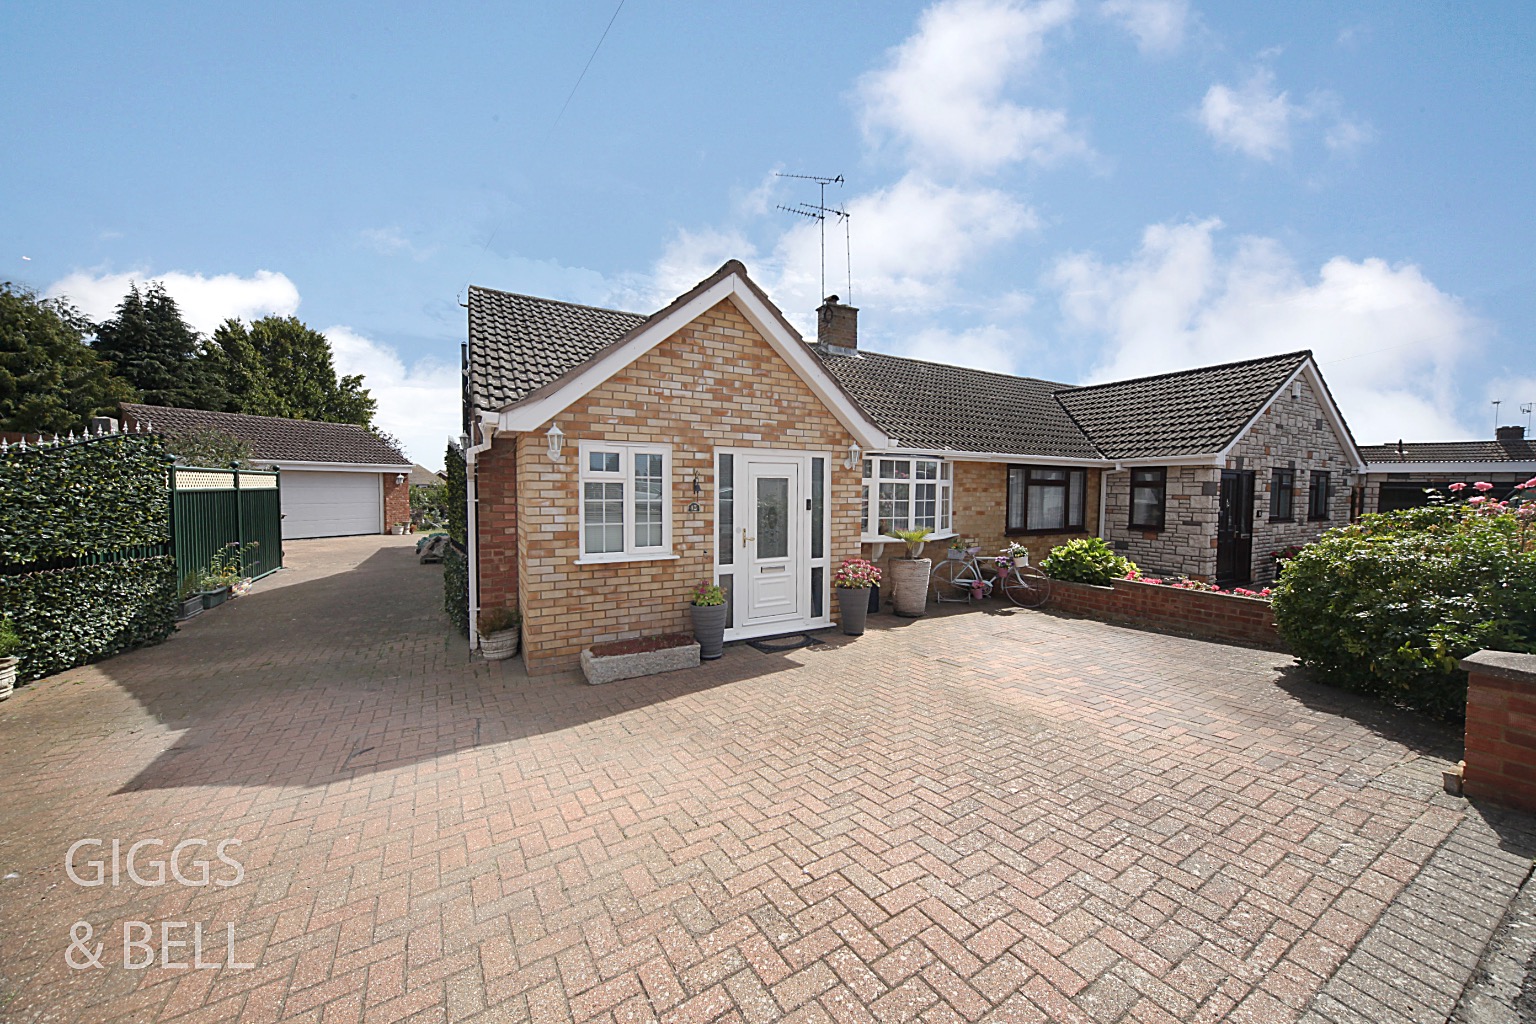 3 bed semi-detached bungalow for sale in Monton Close, Luton - Property Image 1